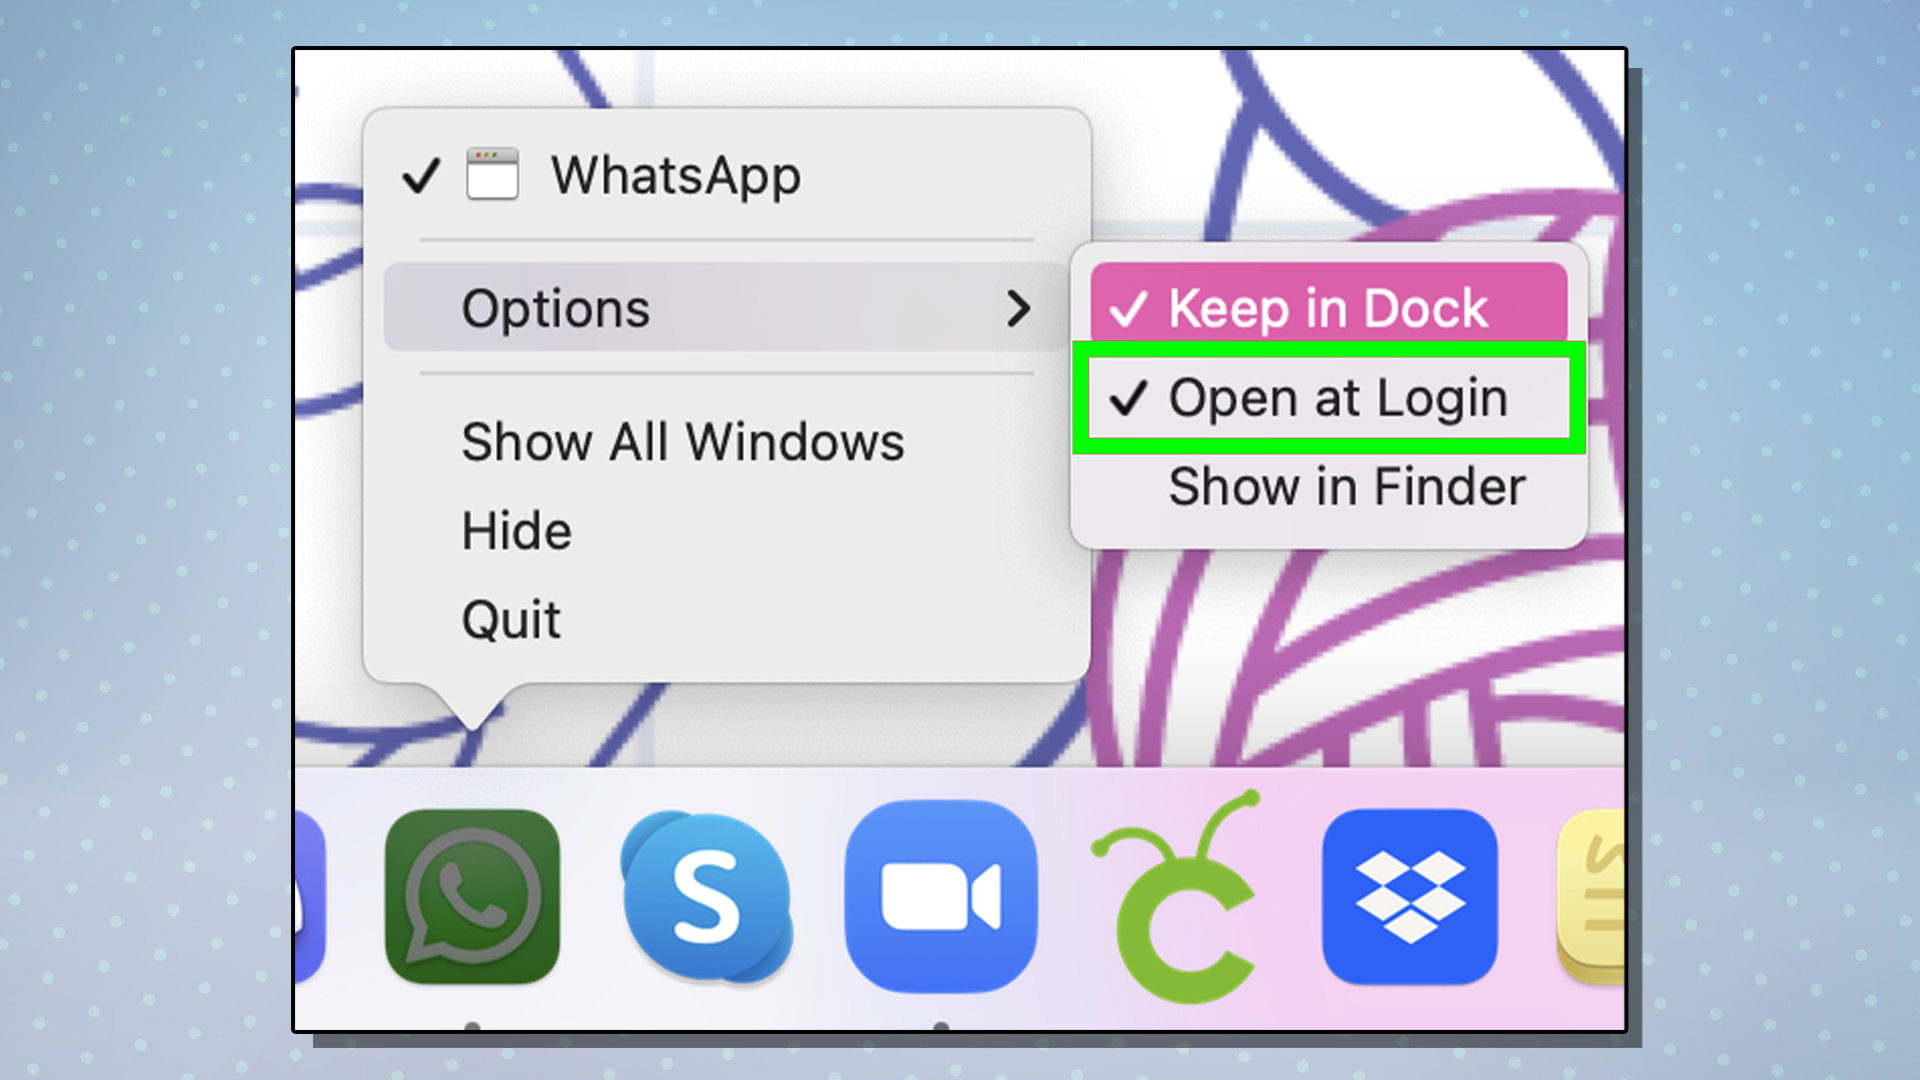 A screen from macOS showing the Open at Login option